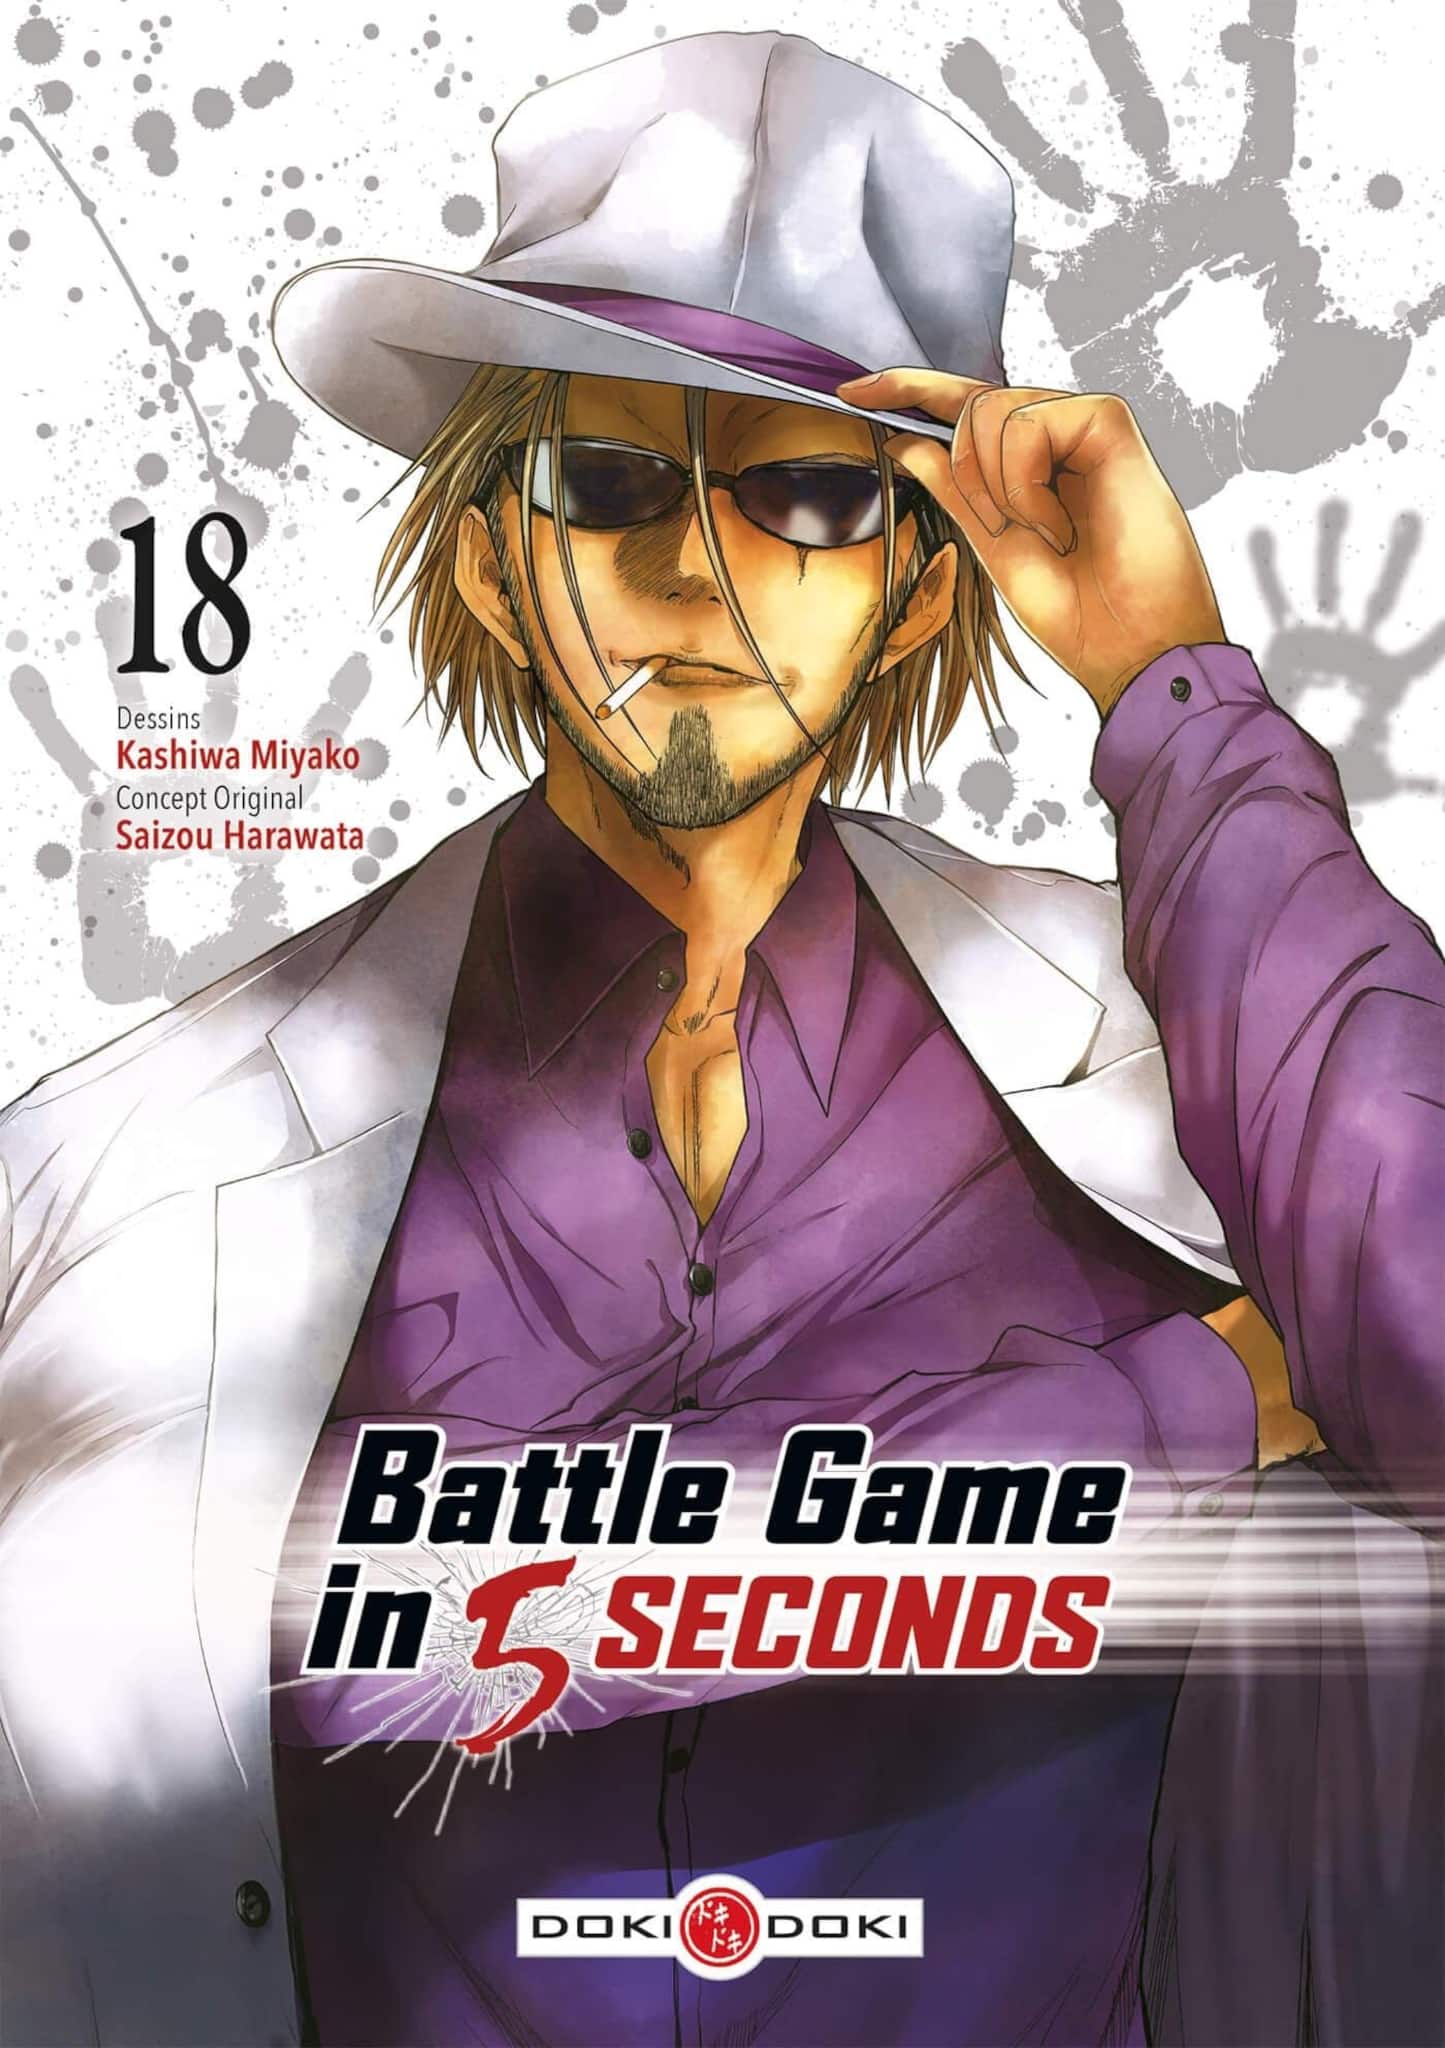 Tome 18 du manga Battle Game in 5 seconds